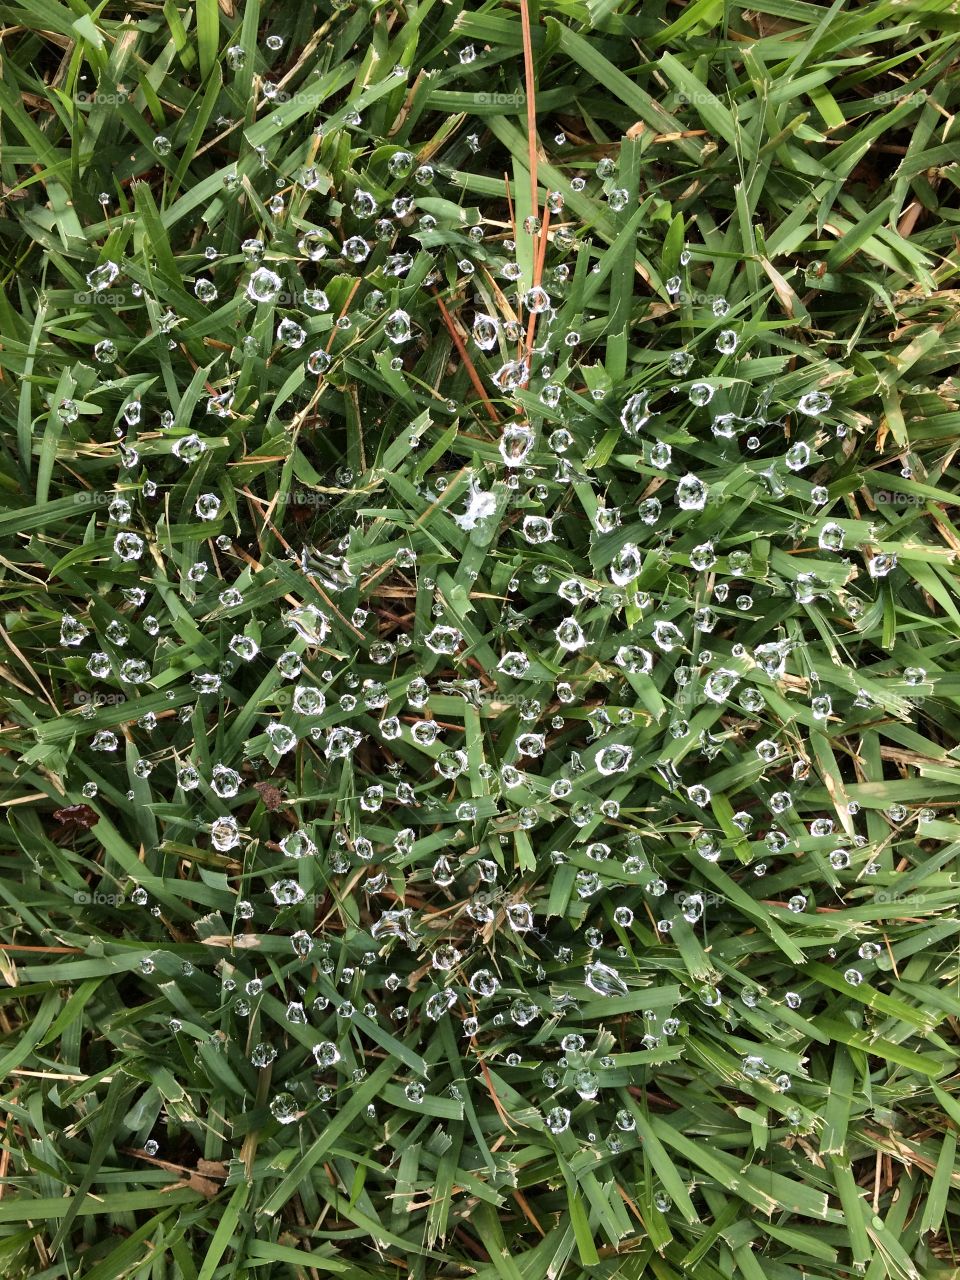 Dewdrops on a spiderweb in the grass